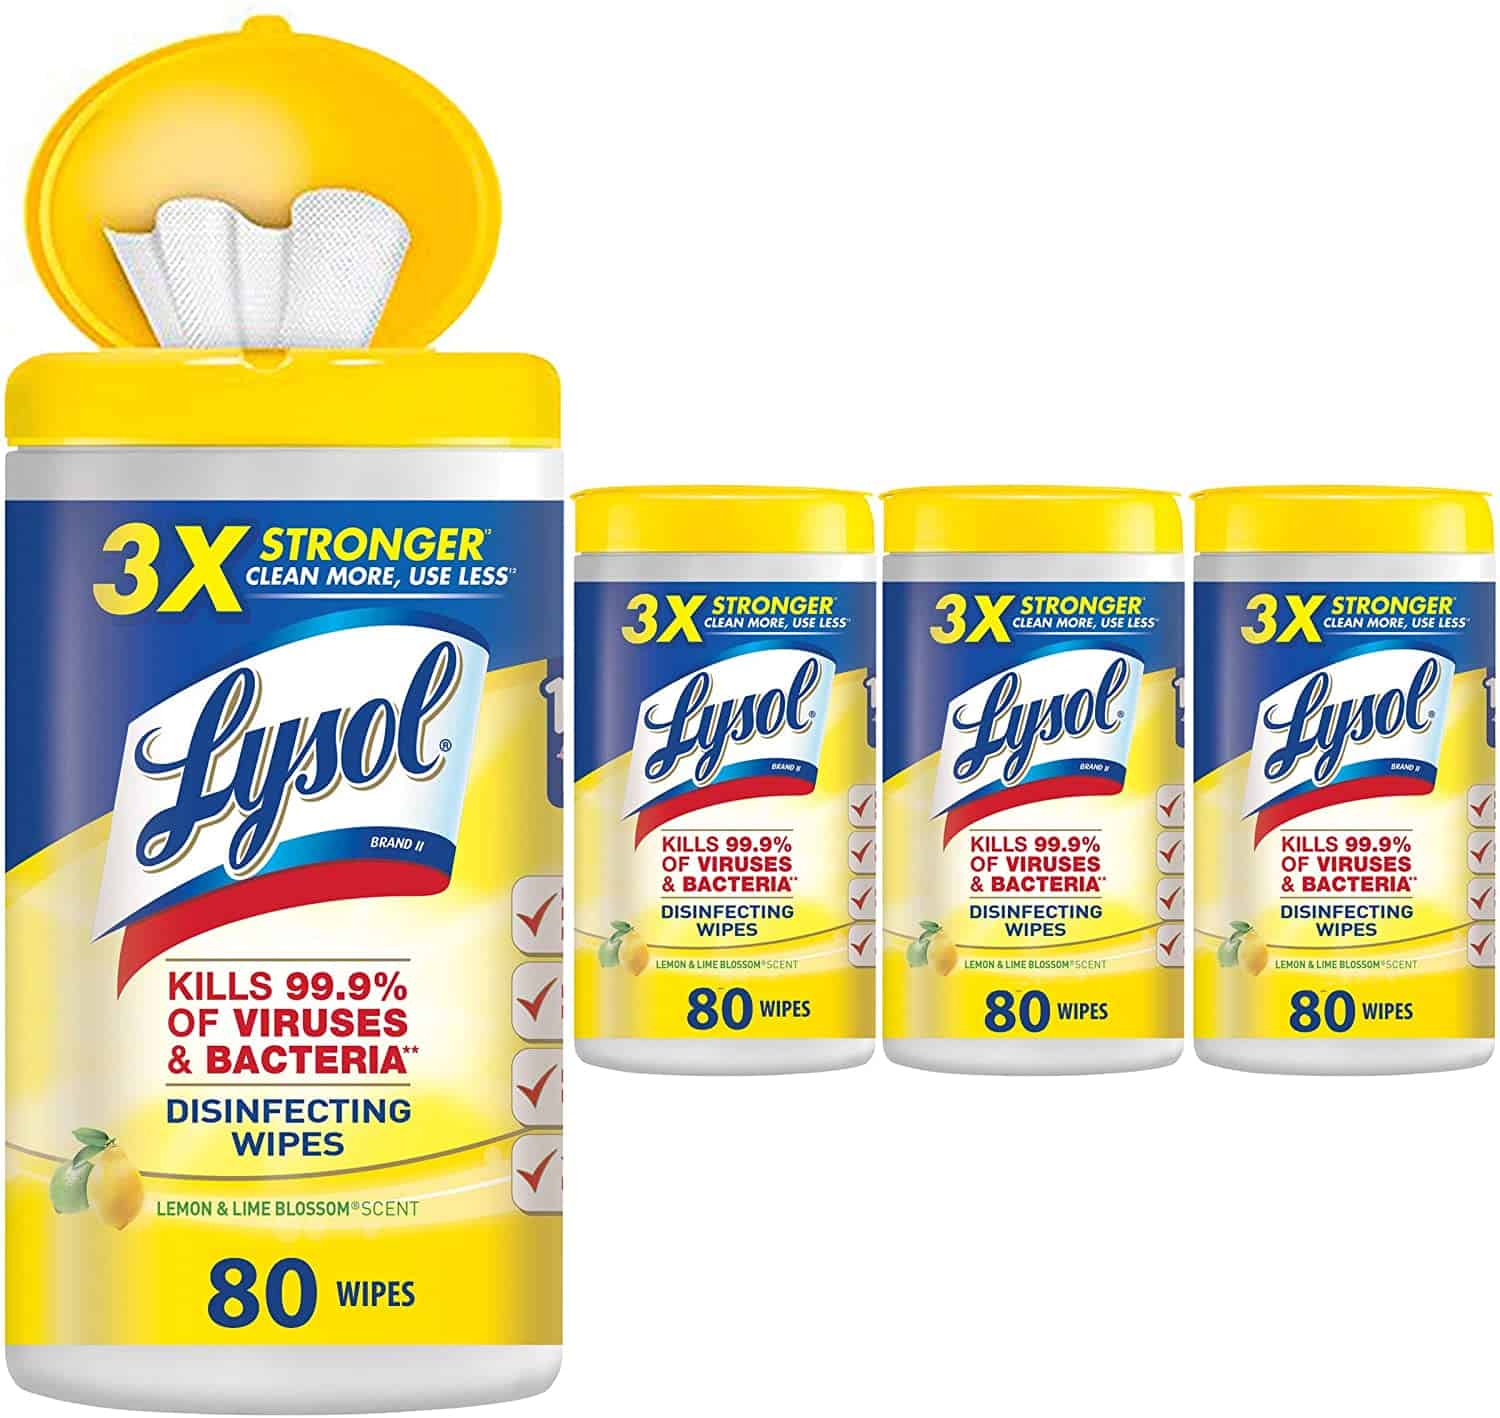 Amazon: 4-Pack Lysol Disinfecting Wipes ONLY $11.52